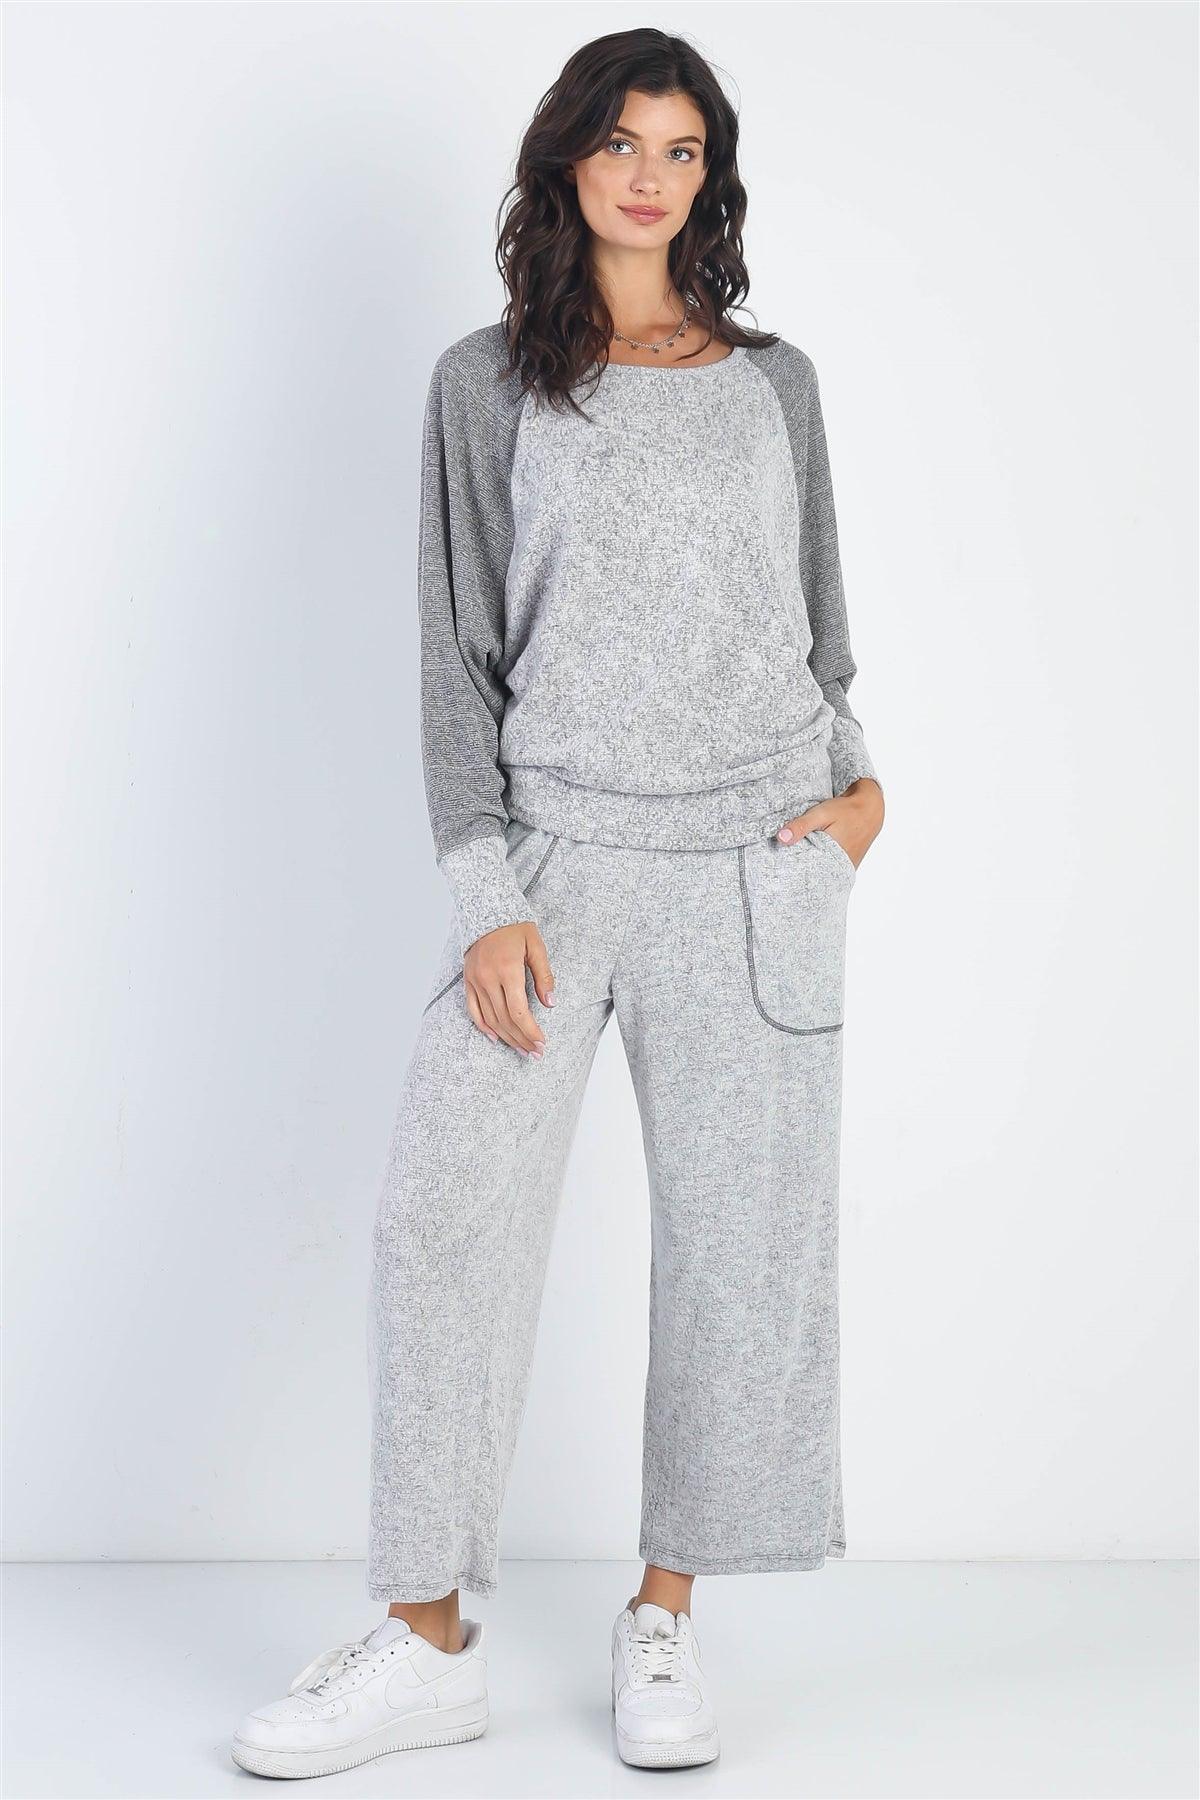 Heather Grey Round Neck Long Sleeve Top & Relax Fit Pants Set /1-1-1